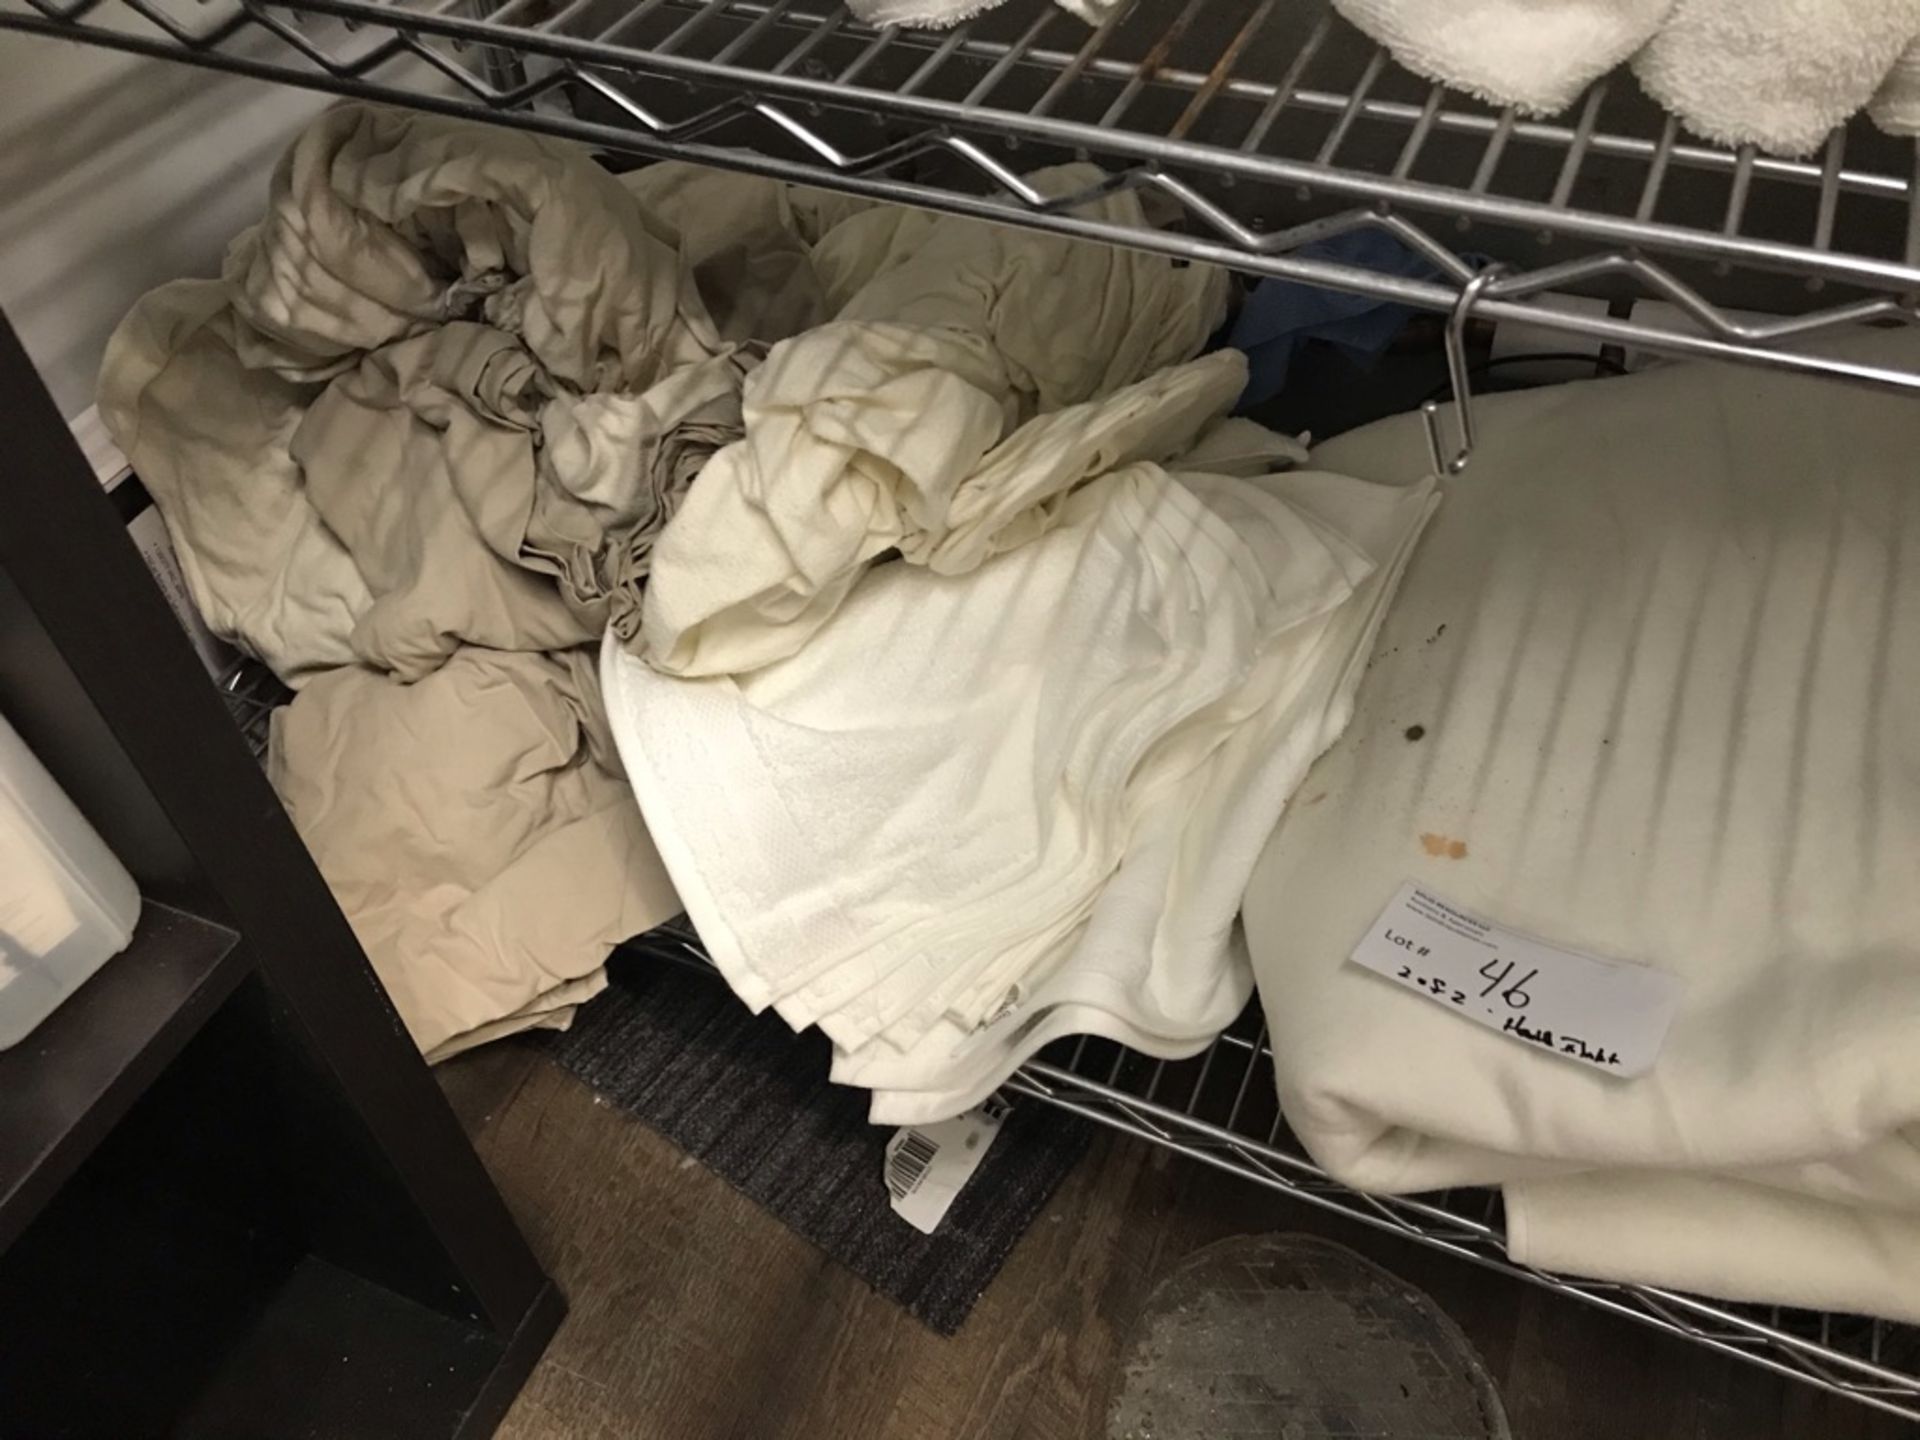 LOT OF: LINENS TO INCLUDE APPROX 24 HAND TOWELS, SHEETS, PILLOWCASES, (2) ELECTRIC BLANKETS